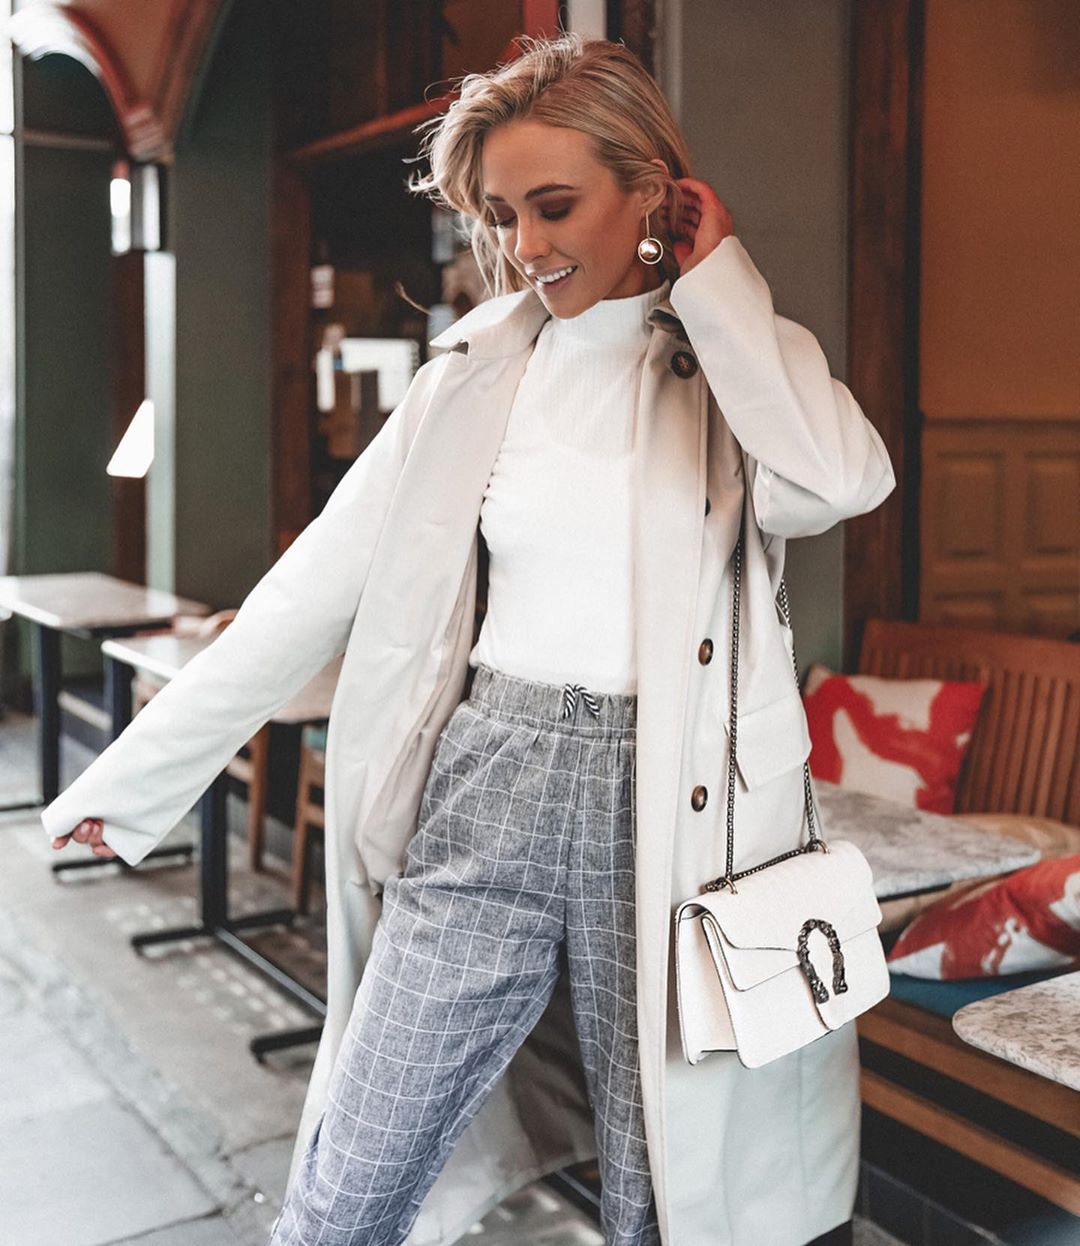 white colour outfit with trench coat, overcoat, jacket: Trench coat,  White coat,  White Trench Coat,  White Jacket,  Nicola Hughes,  White Overcoat,  Wool Coat  